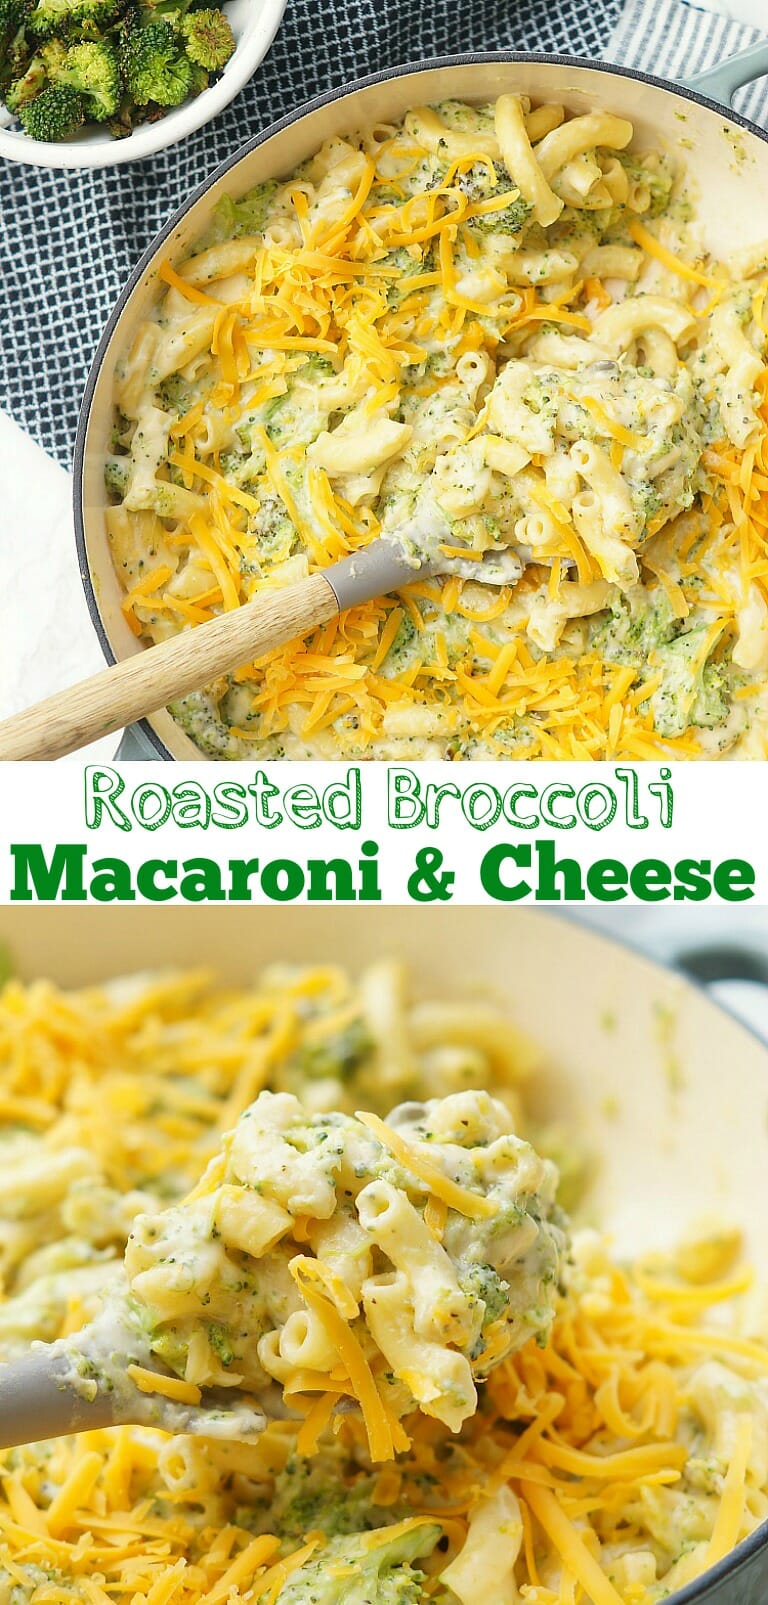 Roasted Broccoli with Macaroni and Cheese